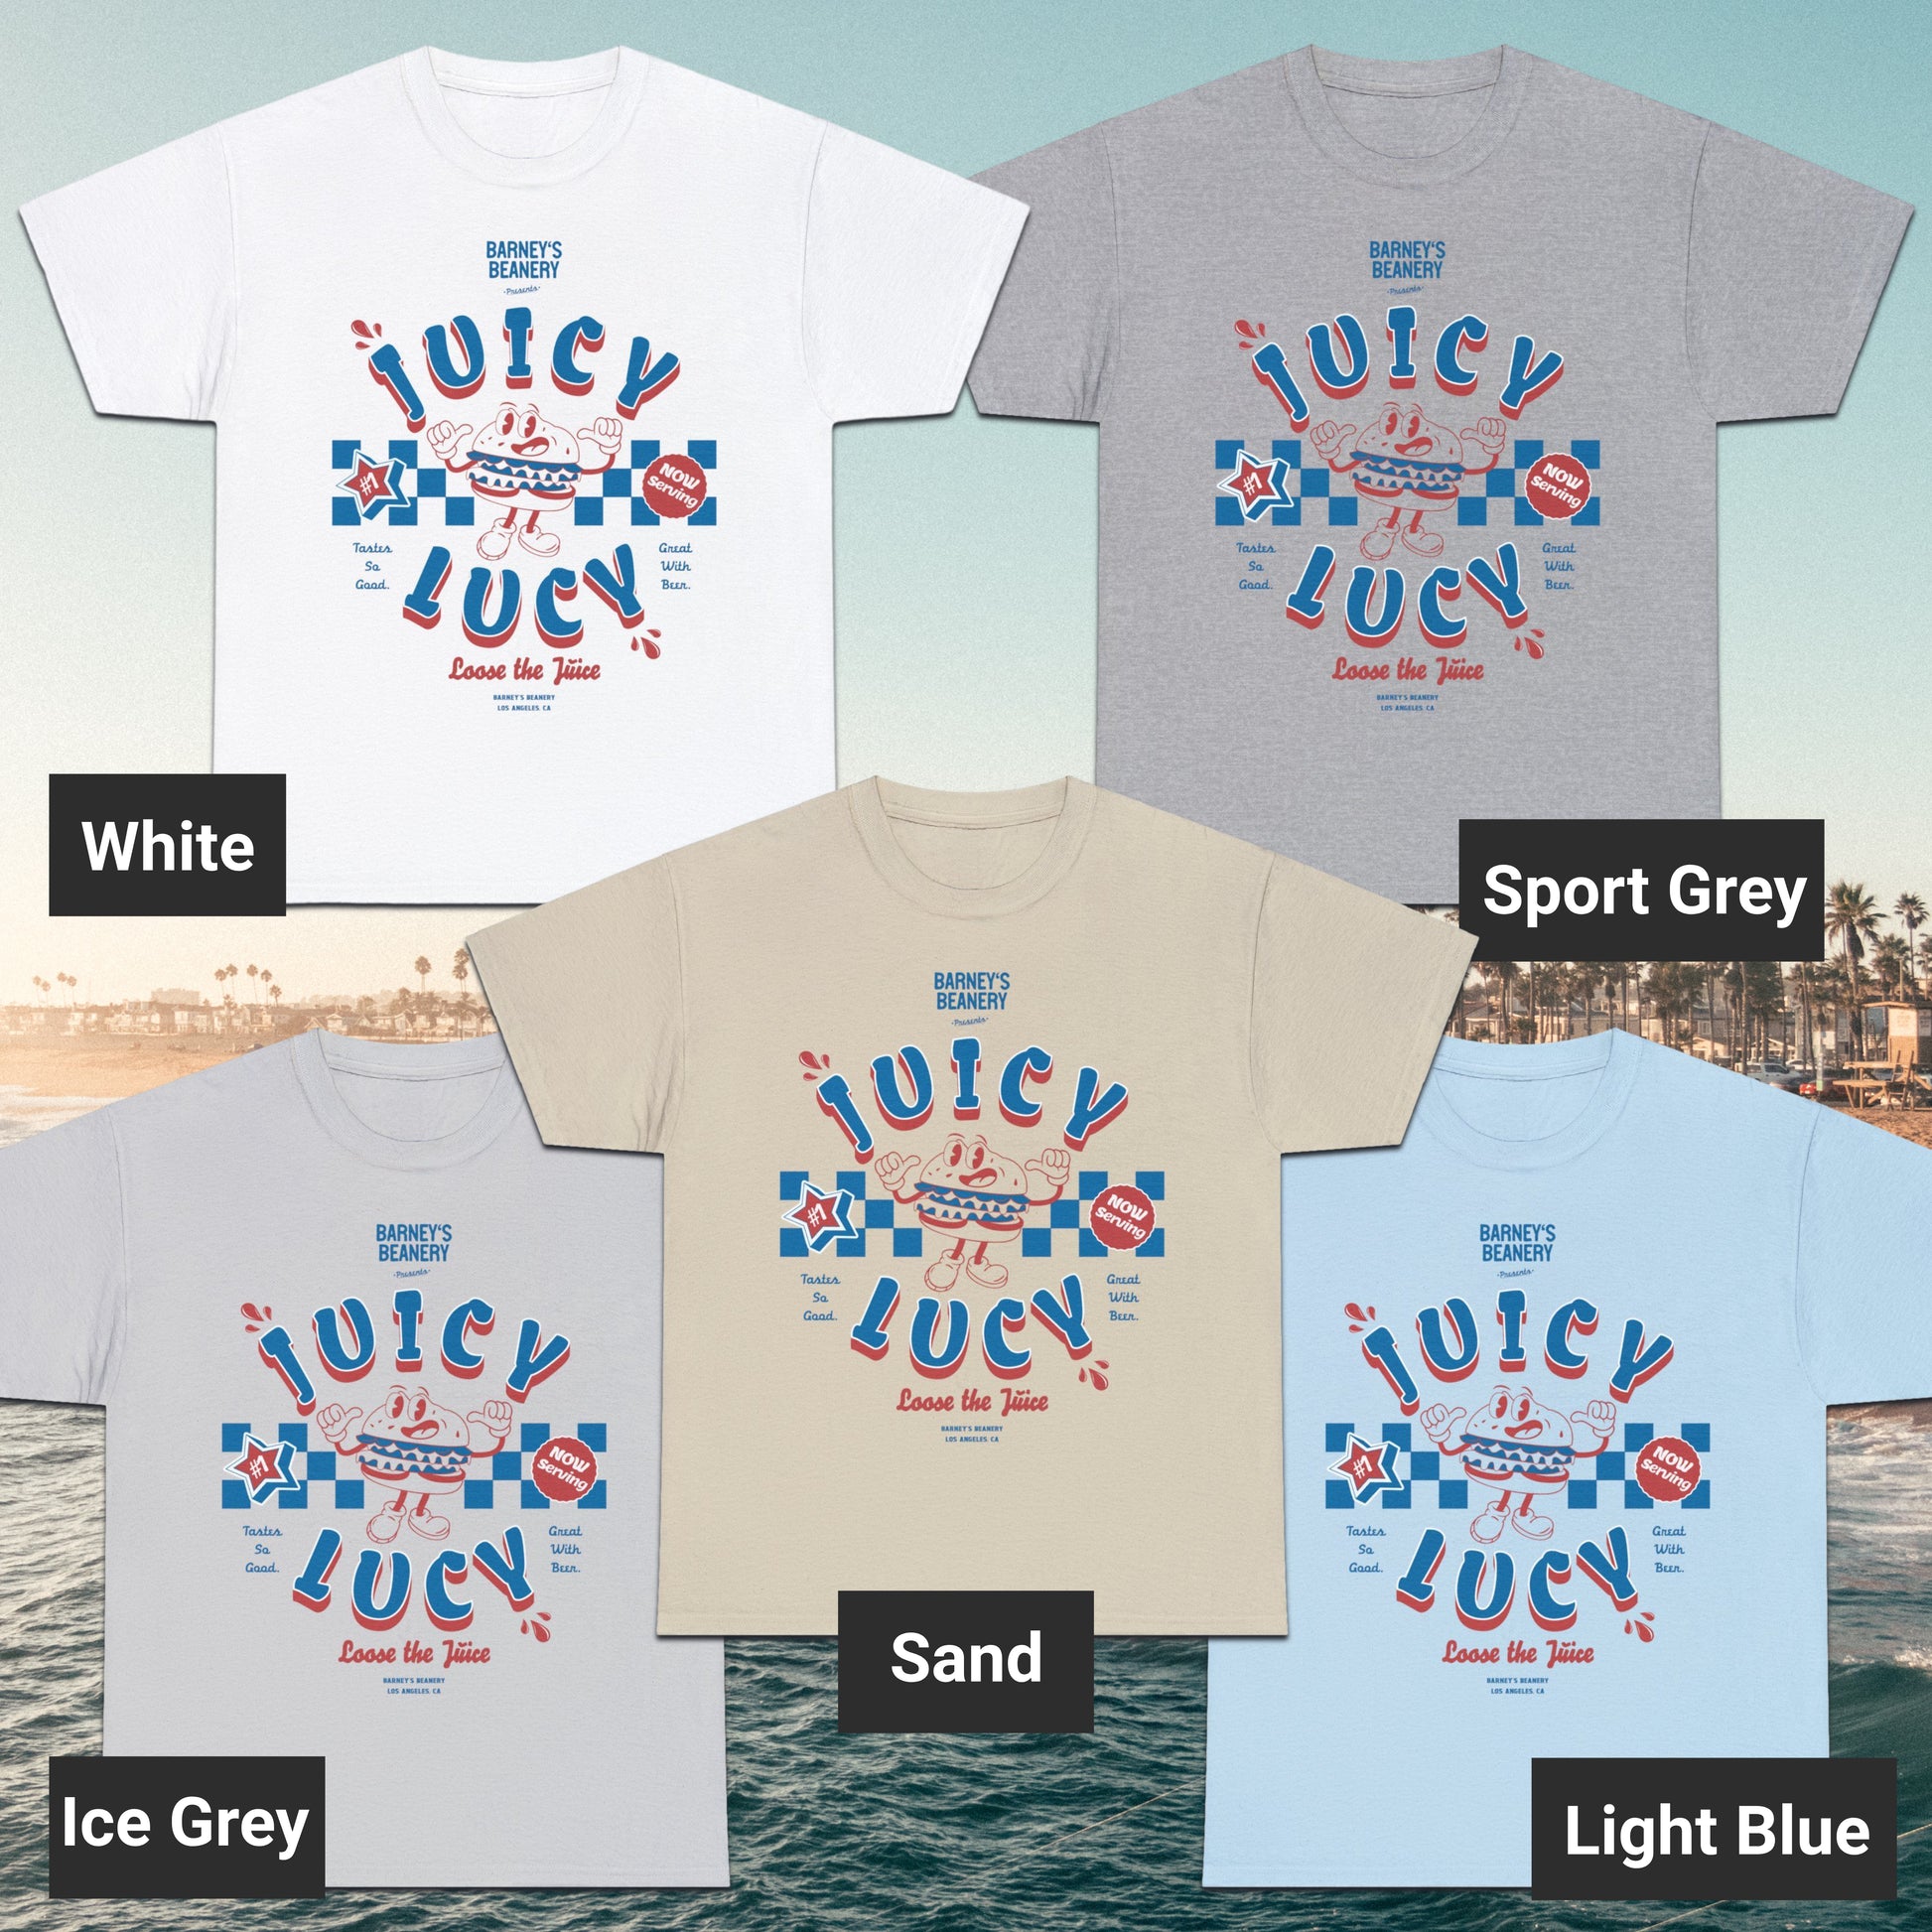 JUICY LUCY - Loose The Juice | BARNEY'S BEANERY - Men's Retro Graphic Tee | White, Sport Grey, Ice grey, Sand, Light Blue Gildan 5000 T-Shirts - Big Red & Blue Graphic On Front Flat Lay View